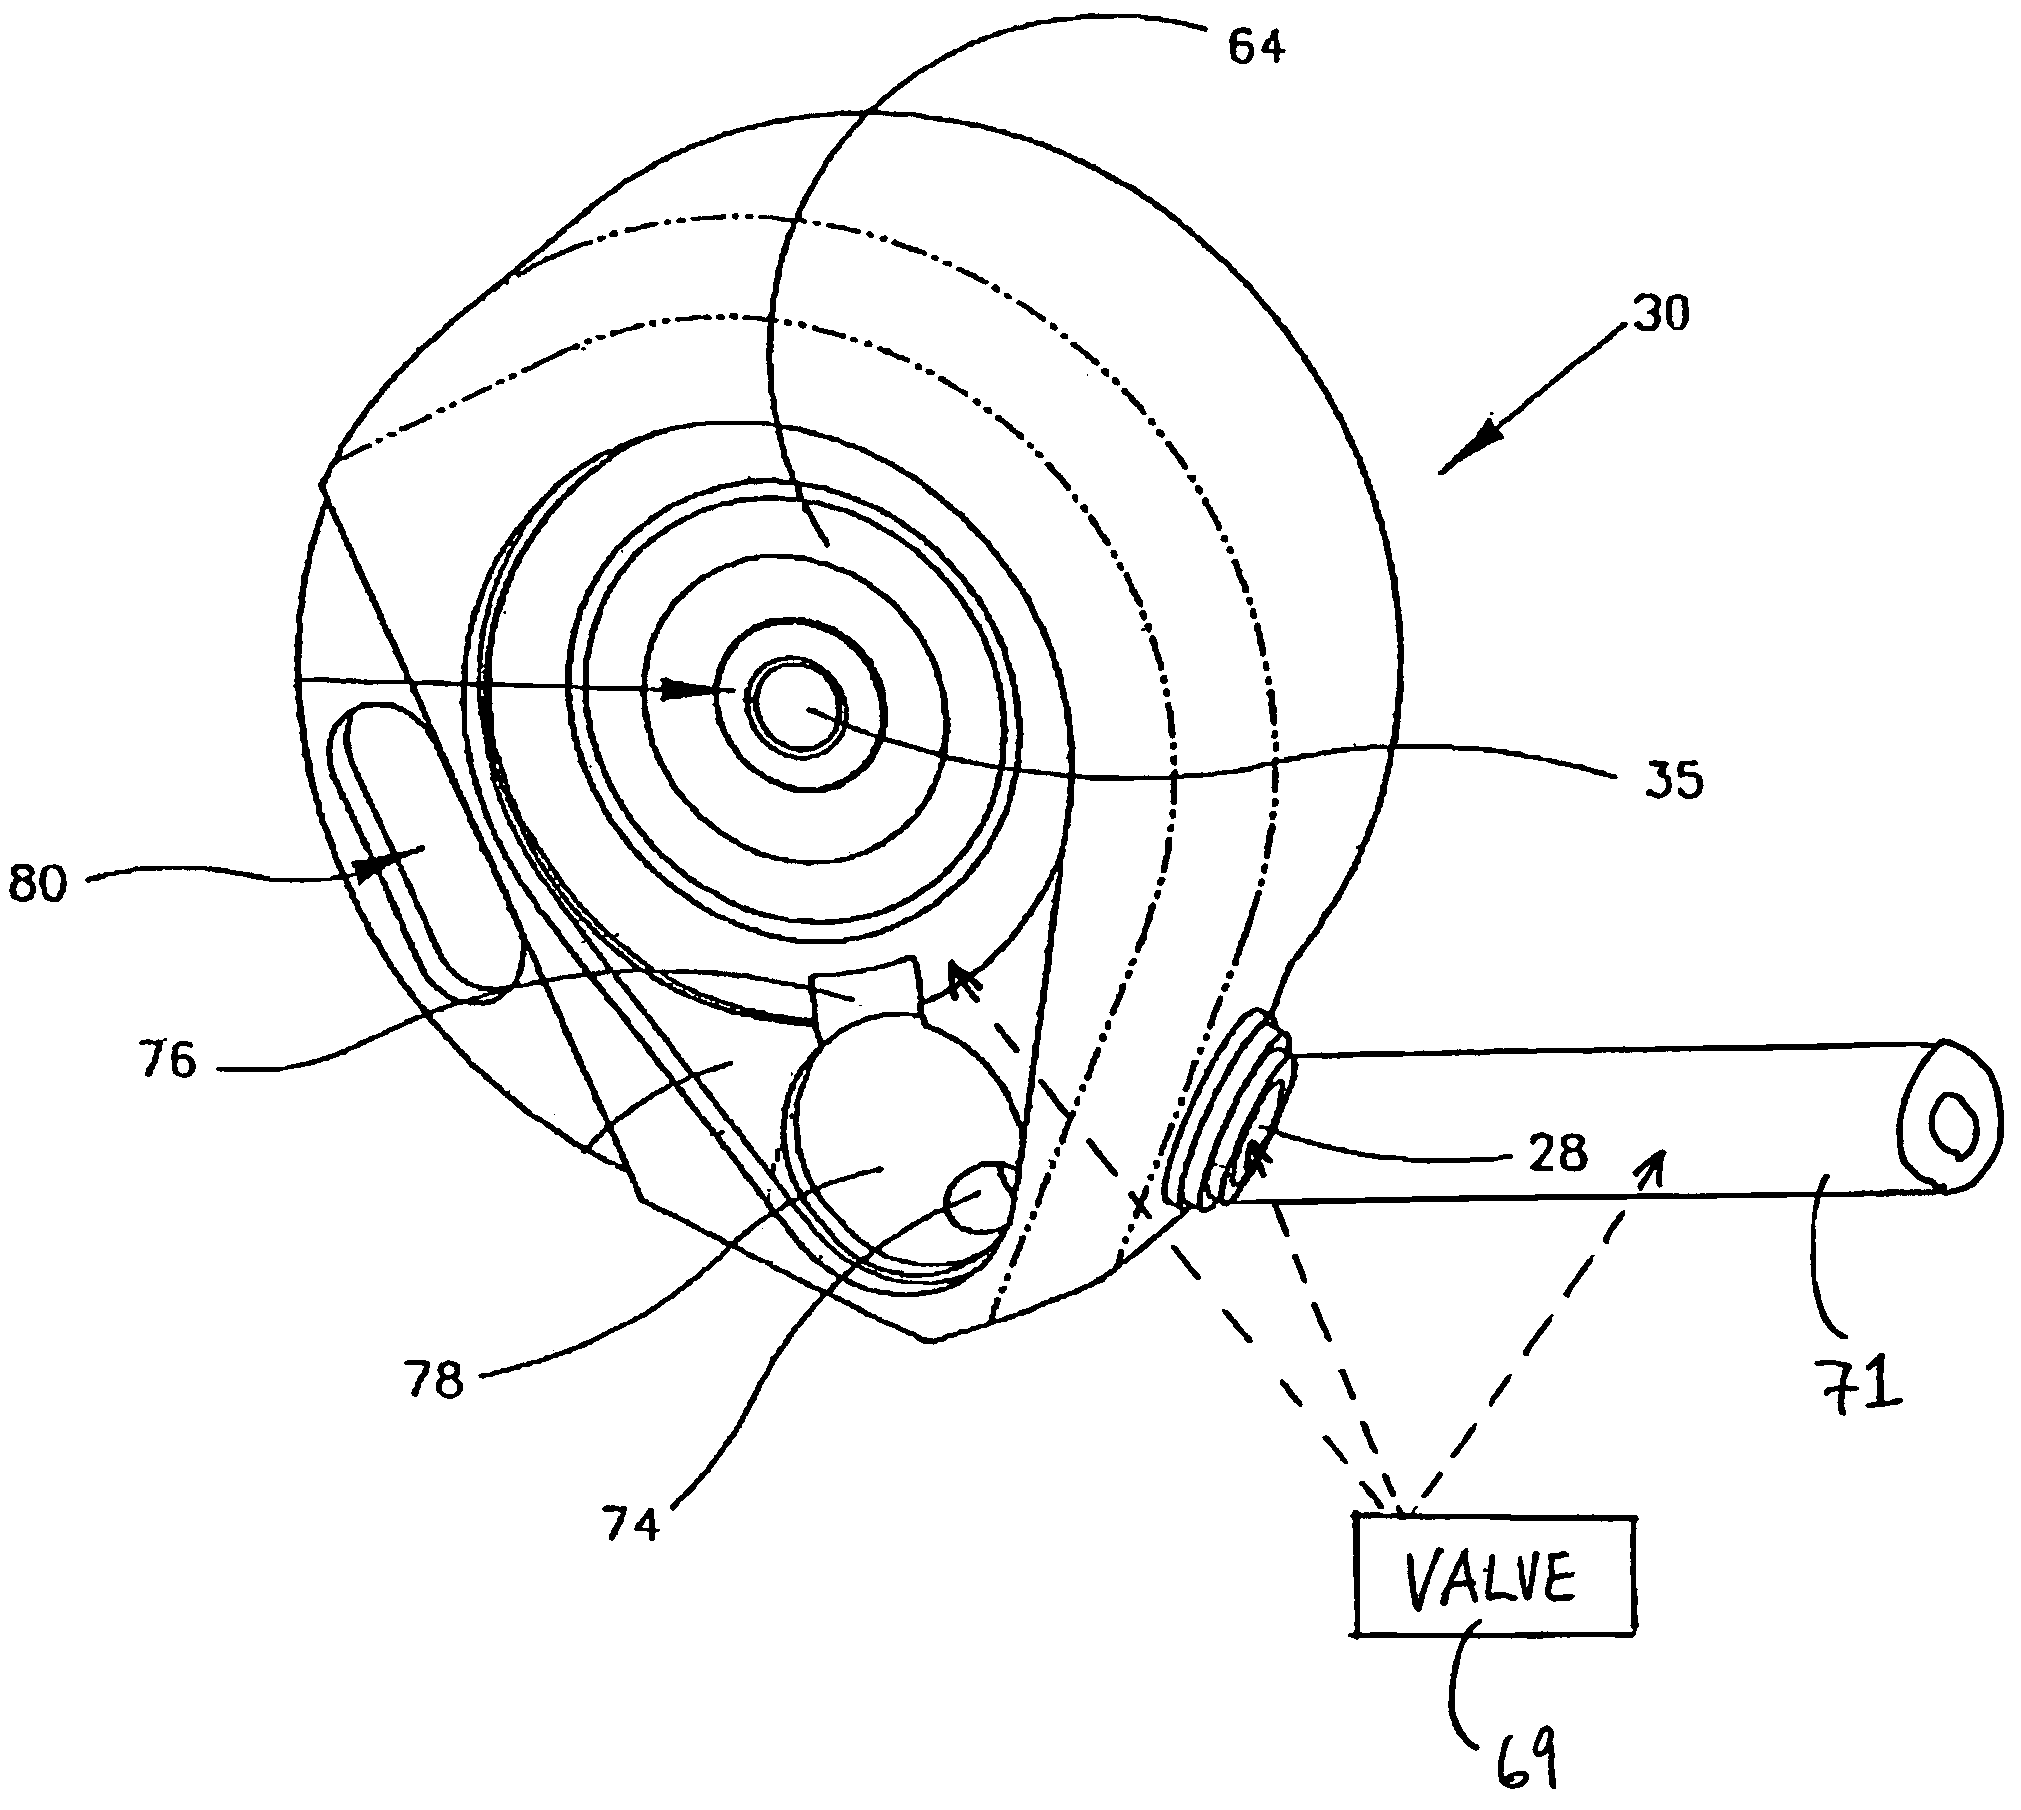 Infusion device having piston operated driving mechanism and positive pressure reservoir